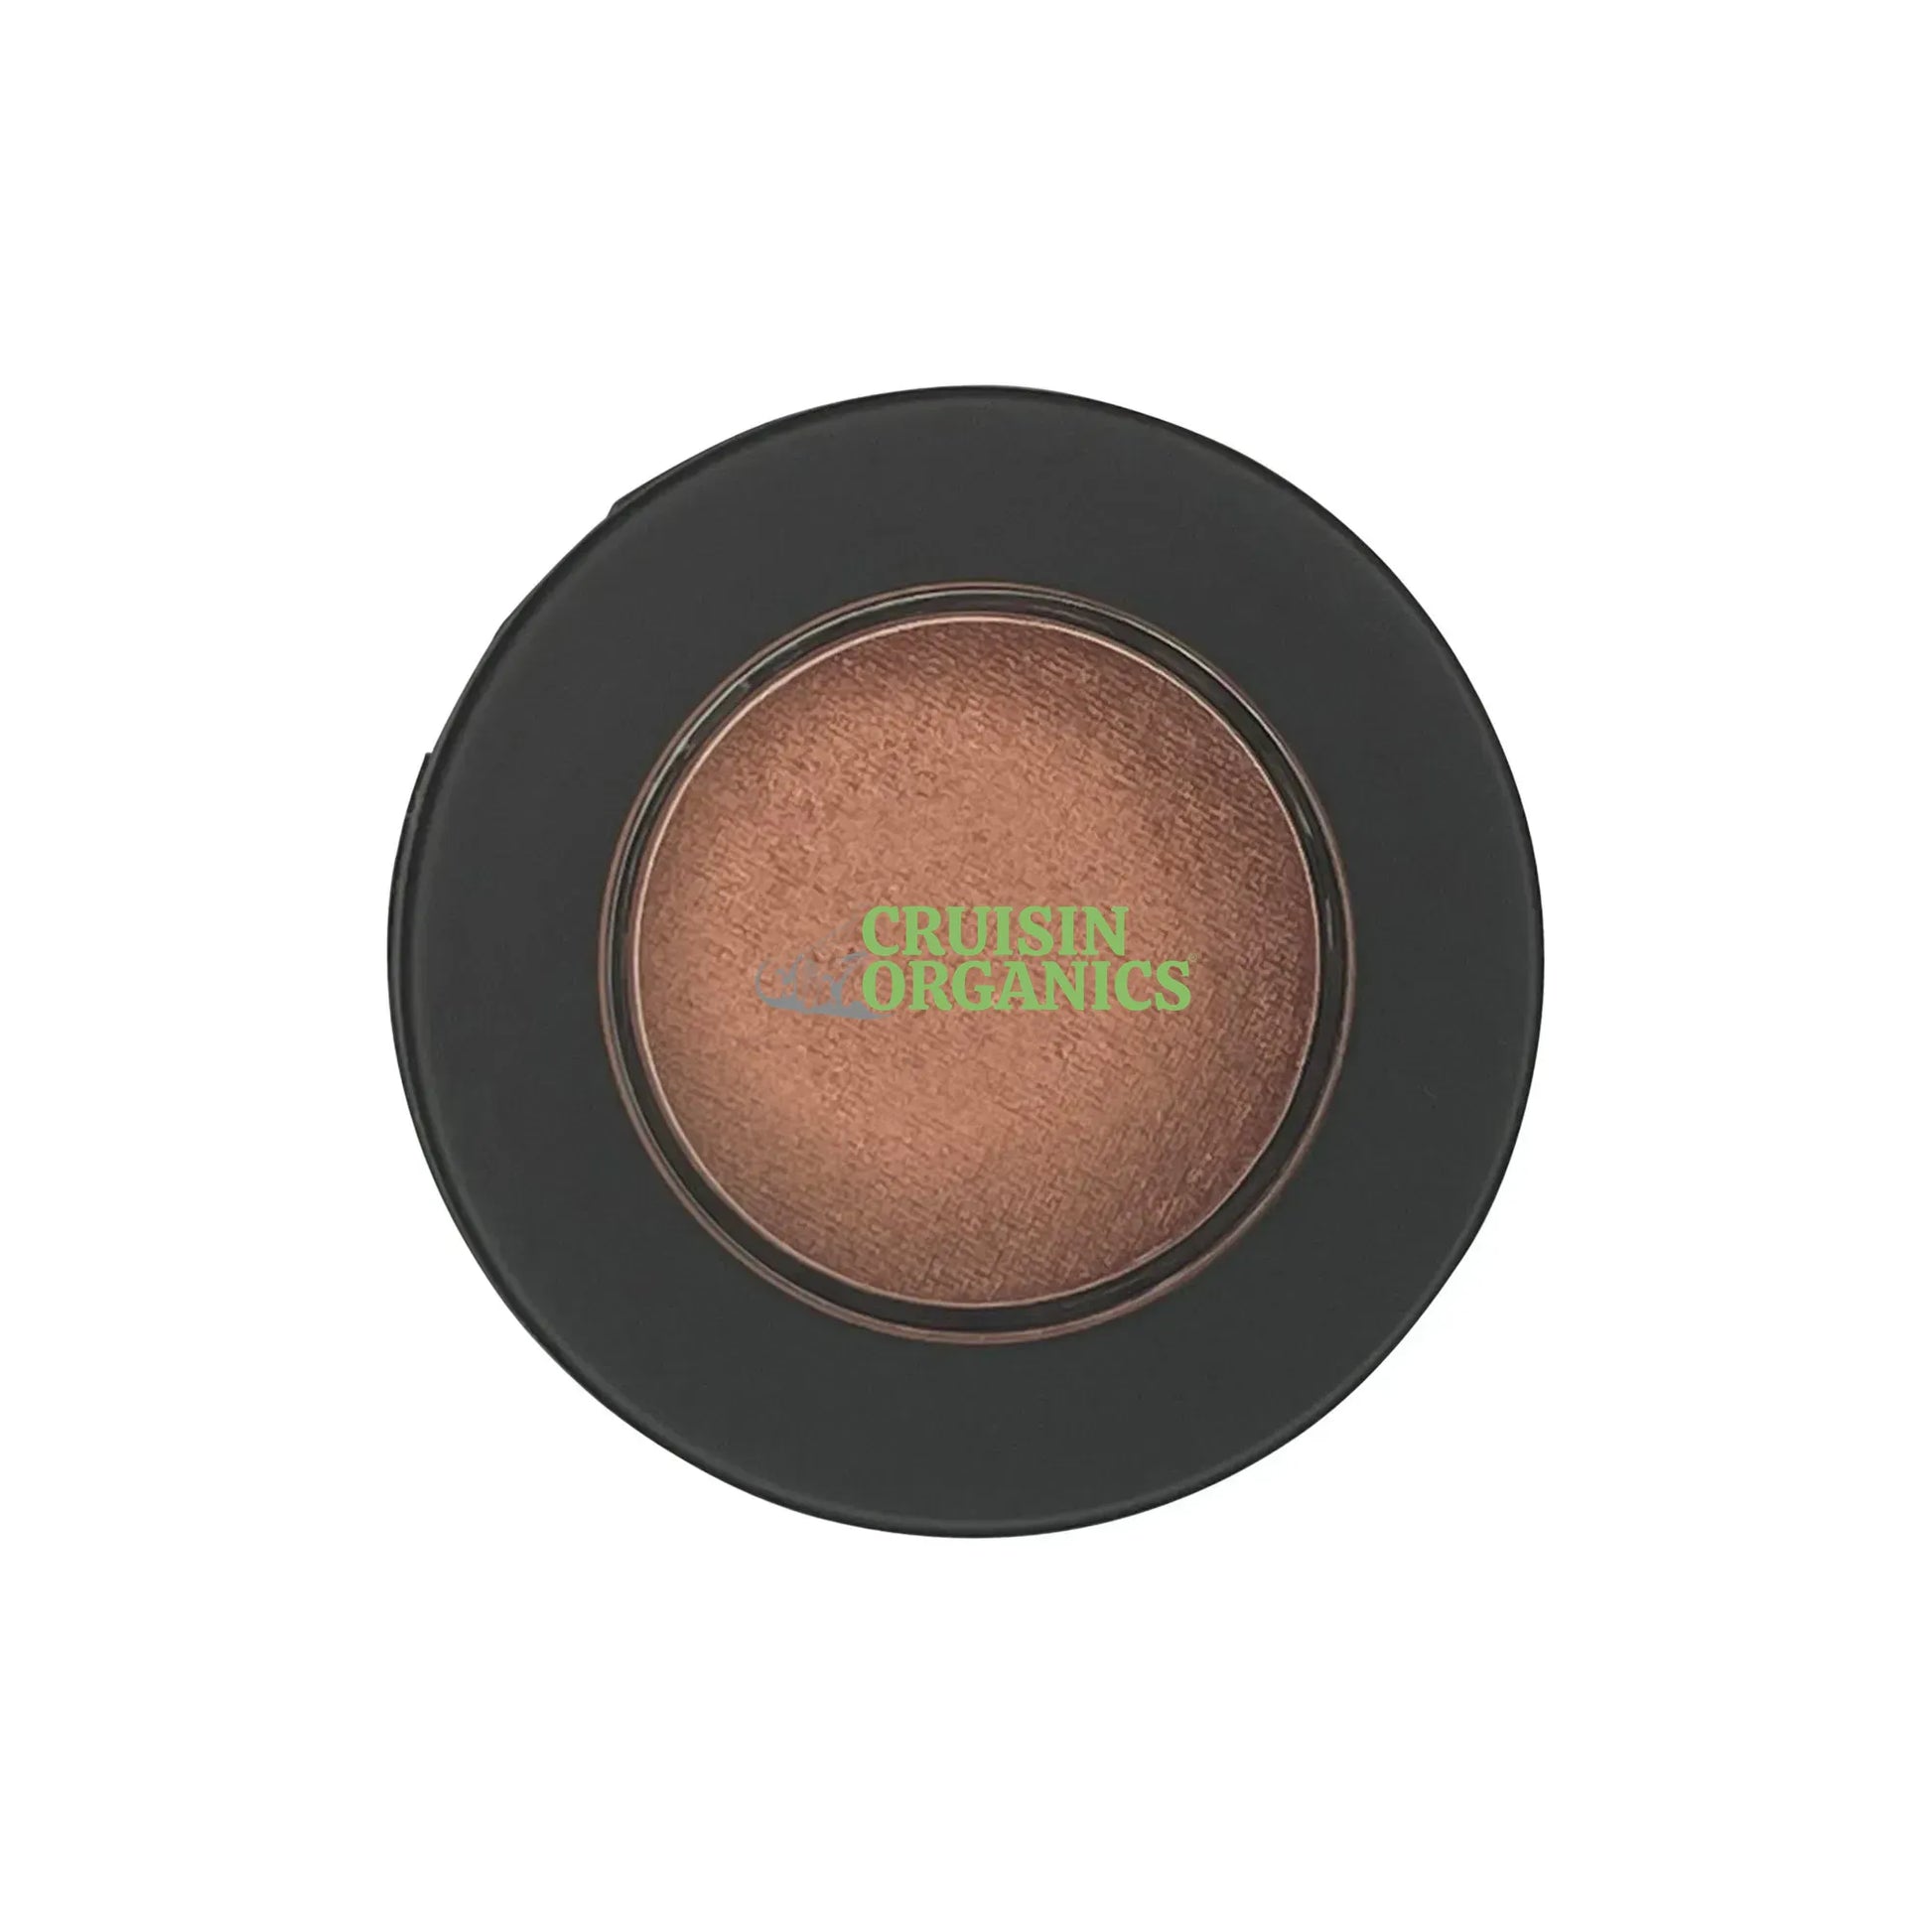 Illuminate your eyes with the Dawn Single Pan Eyeshadow from Cruisin Organics. Our convenient individual shadows are perfect for achieving a smoky look, catering to the bold and vibrant energy within.